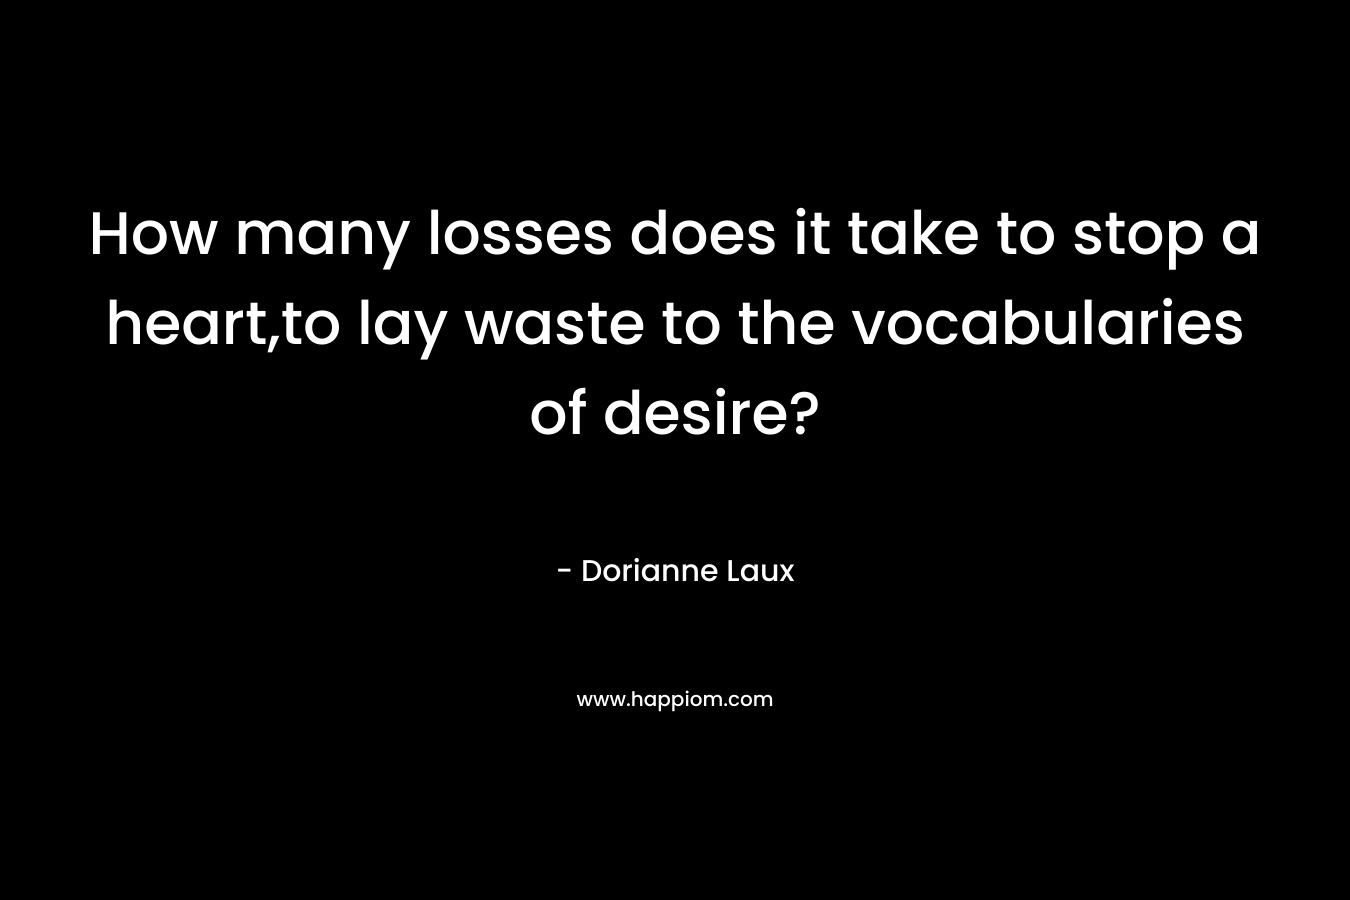 How many losses does it take to stop a heart,to lay waste to the vocabularies of desire?